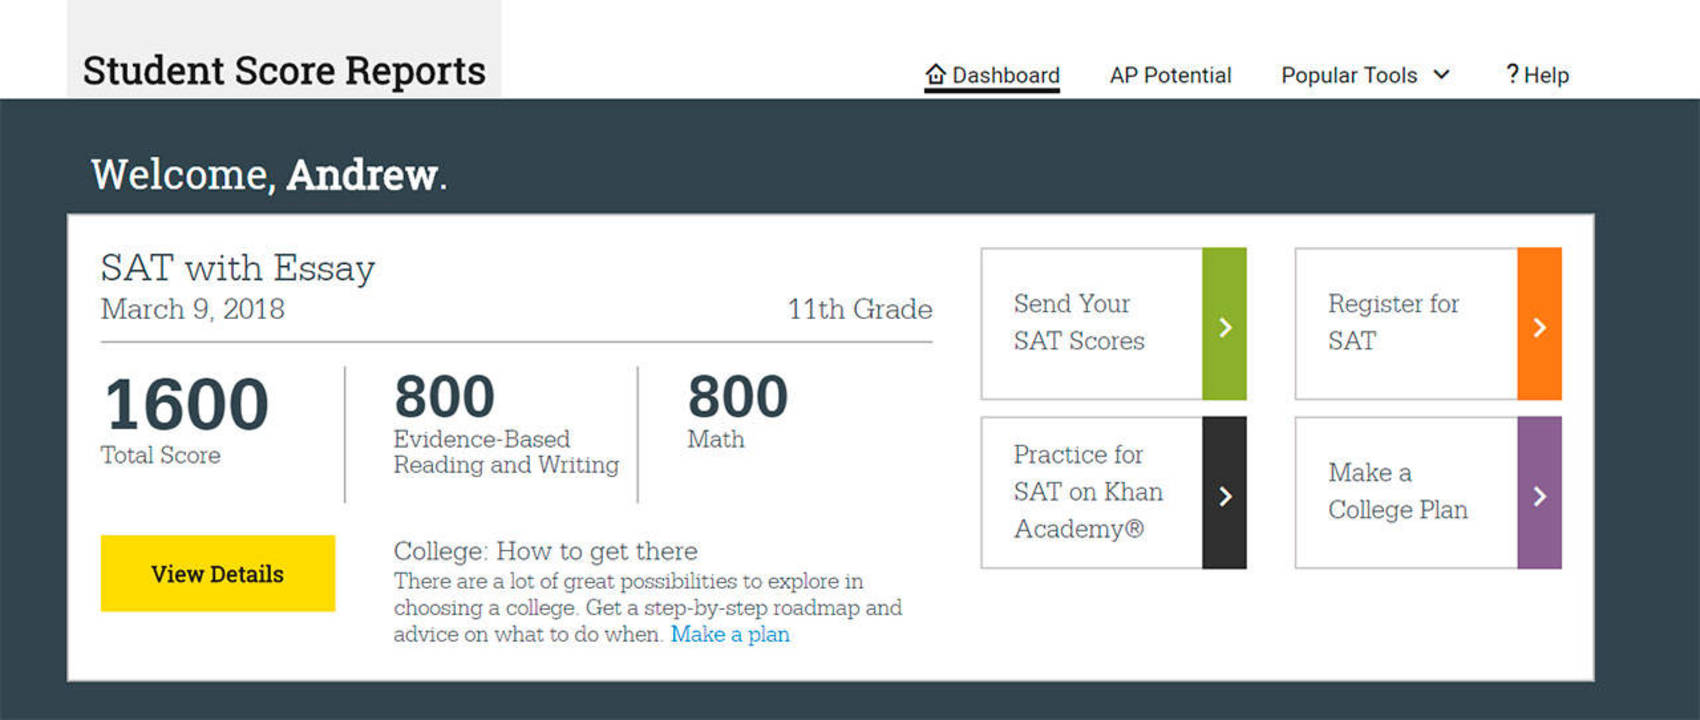 How to send sat score without essay